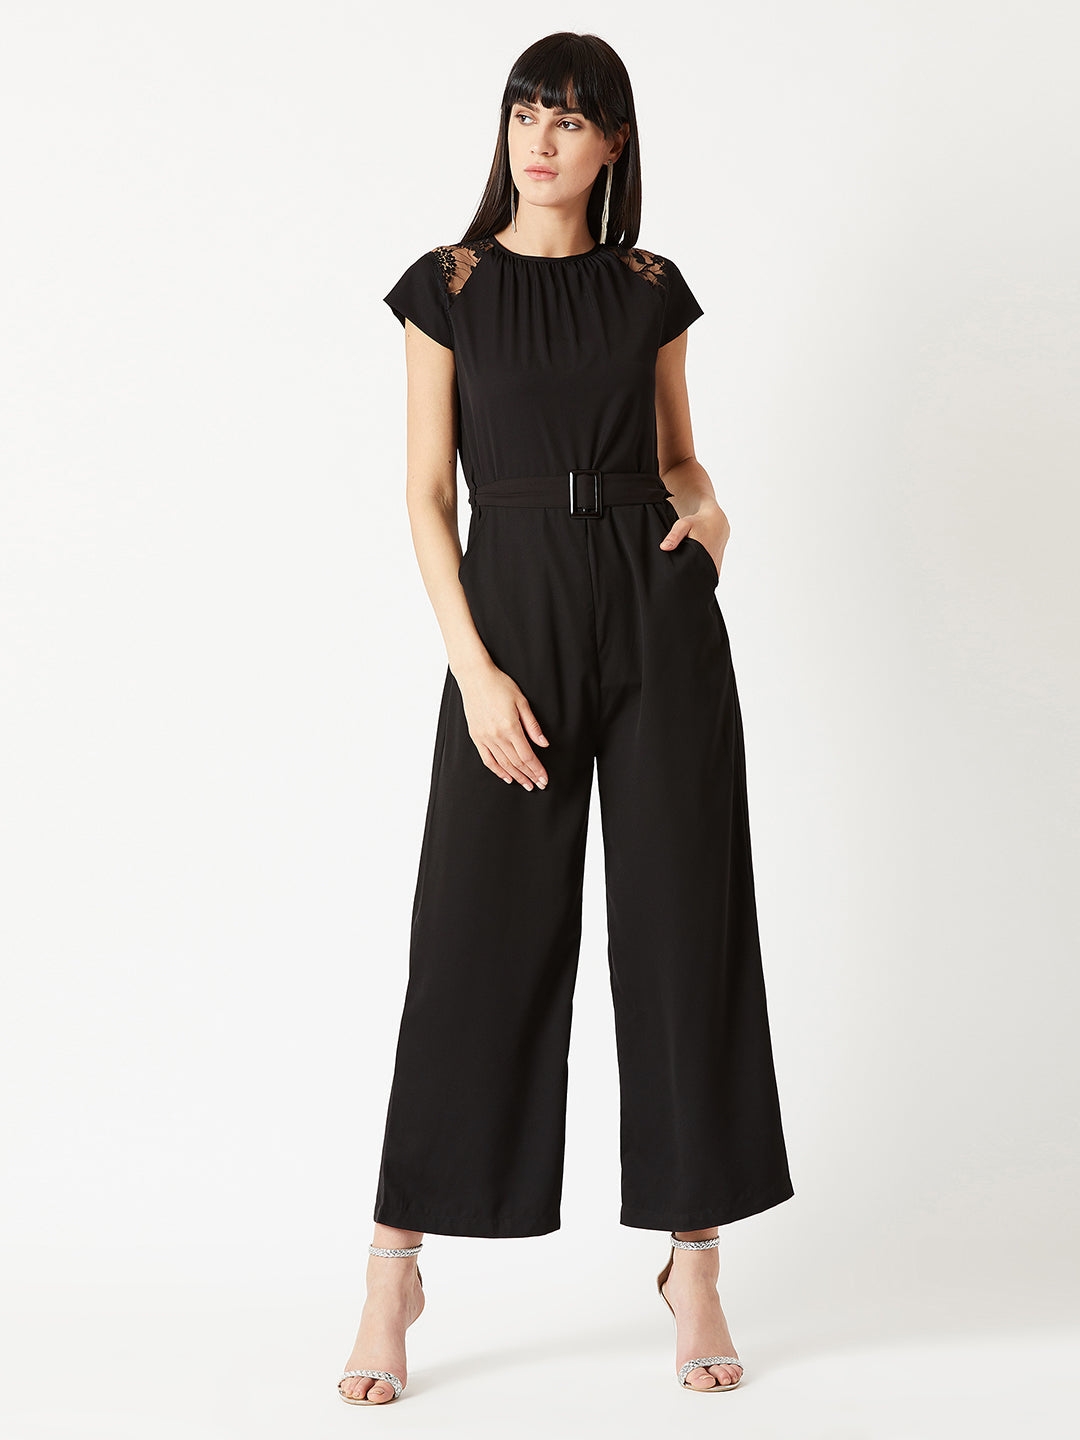 MISS CHASE | Black Round Neck Cap Sleeve Solid Straight Leg Belted Maxi Jumpsuit